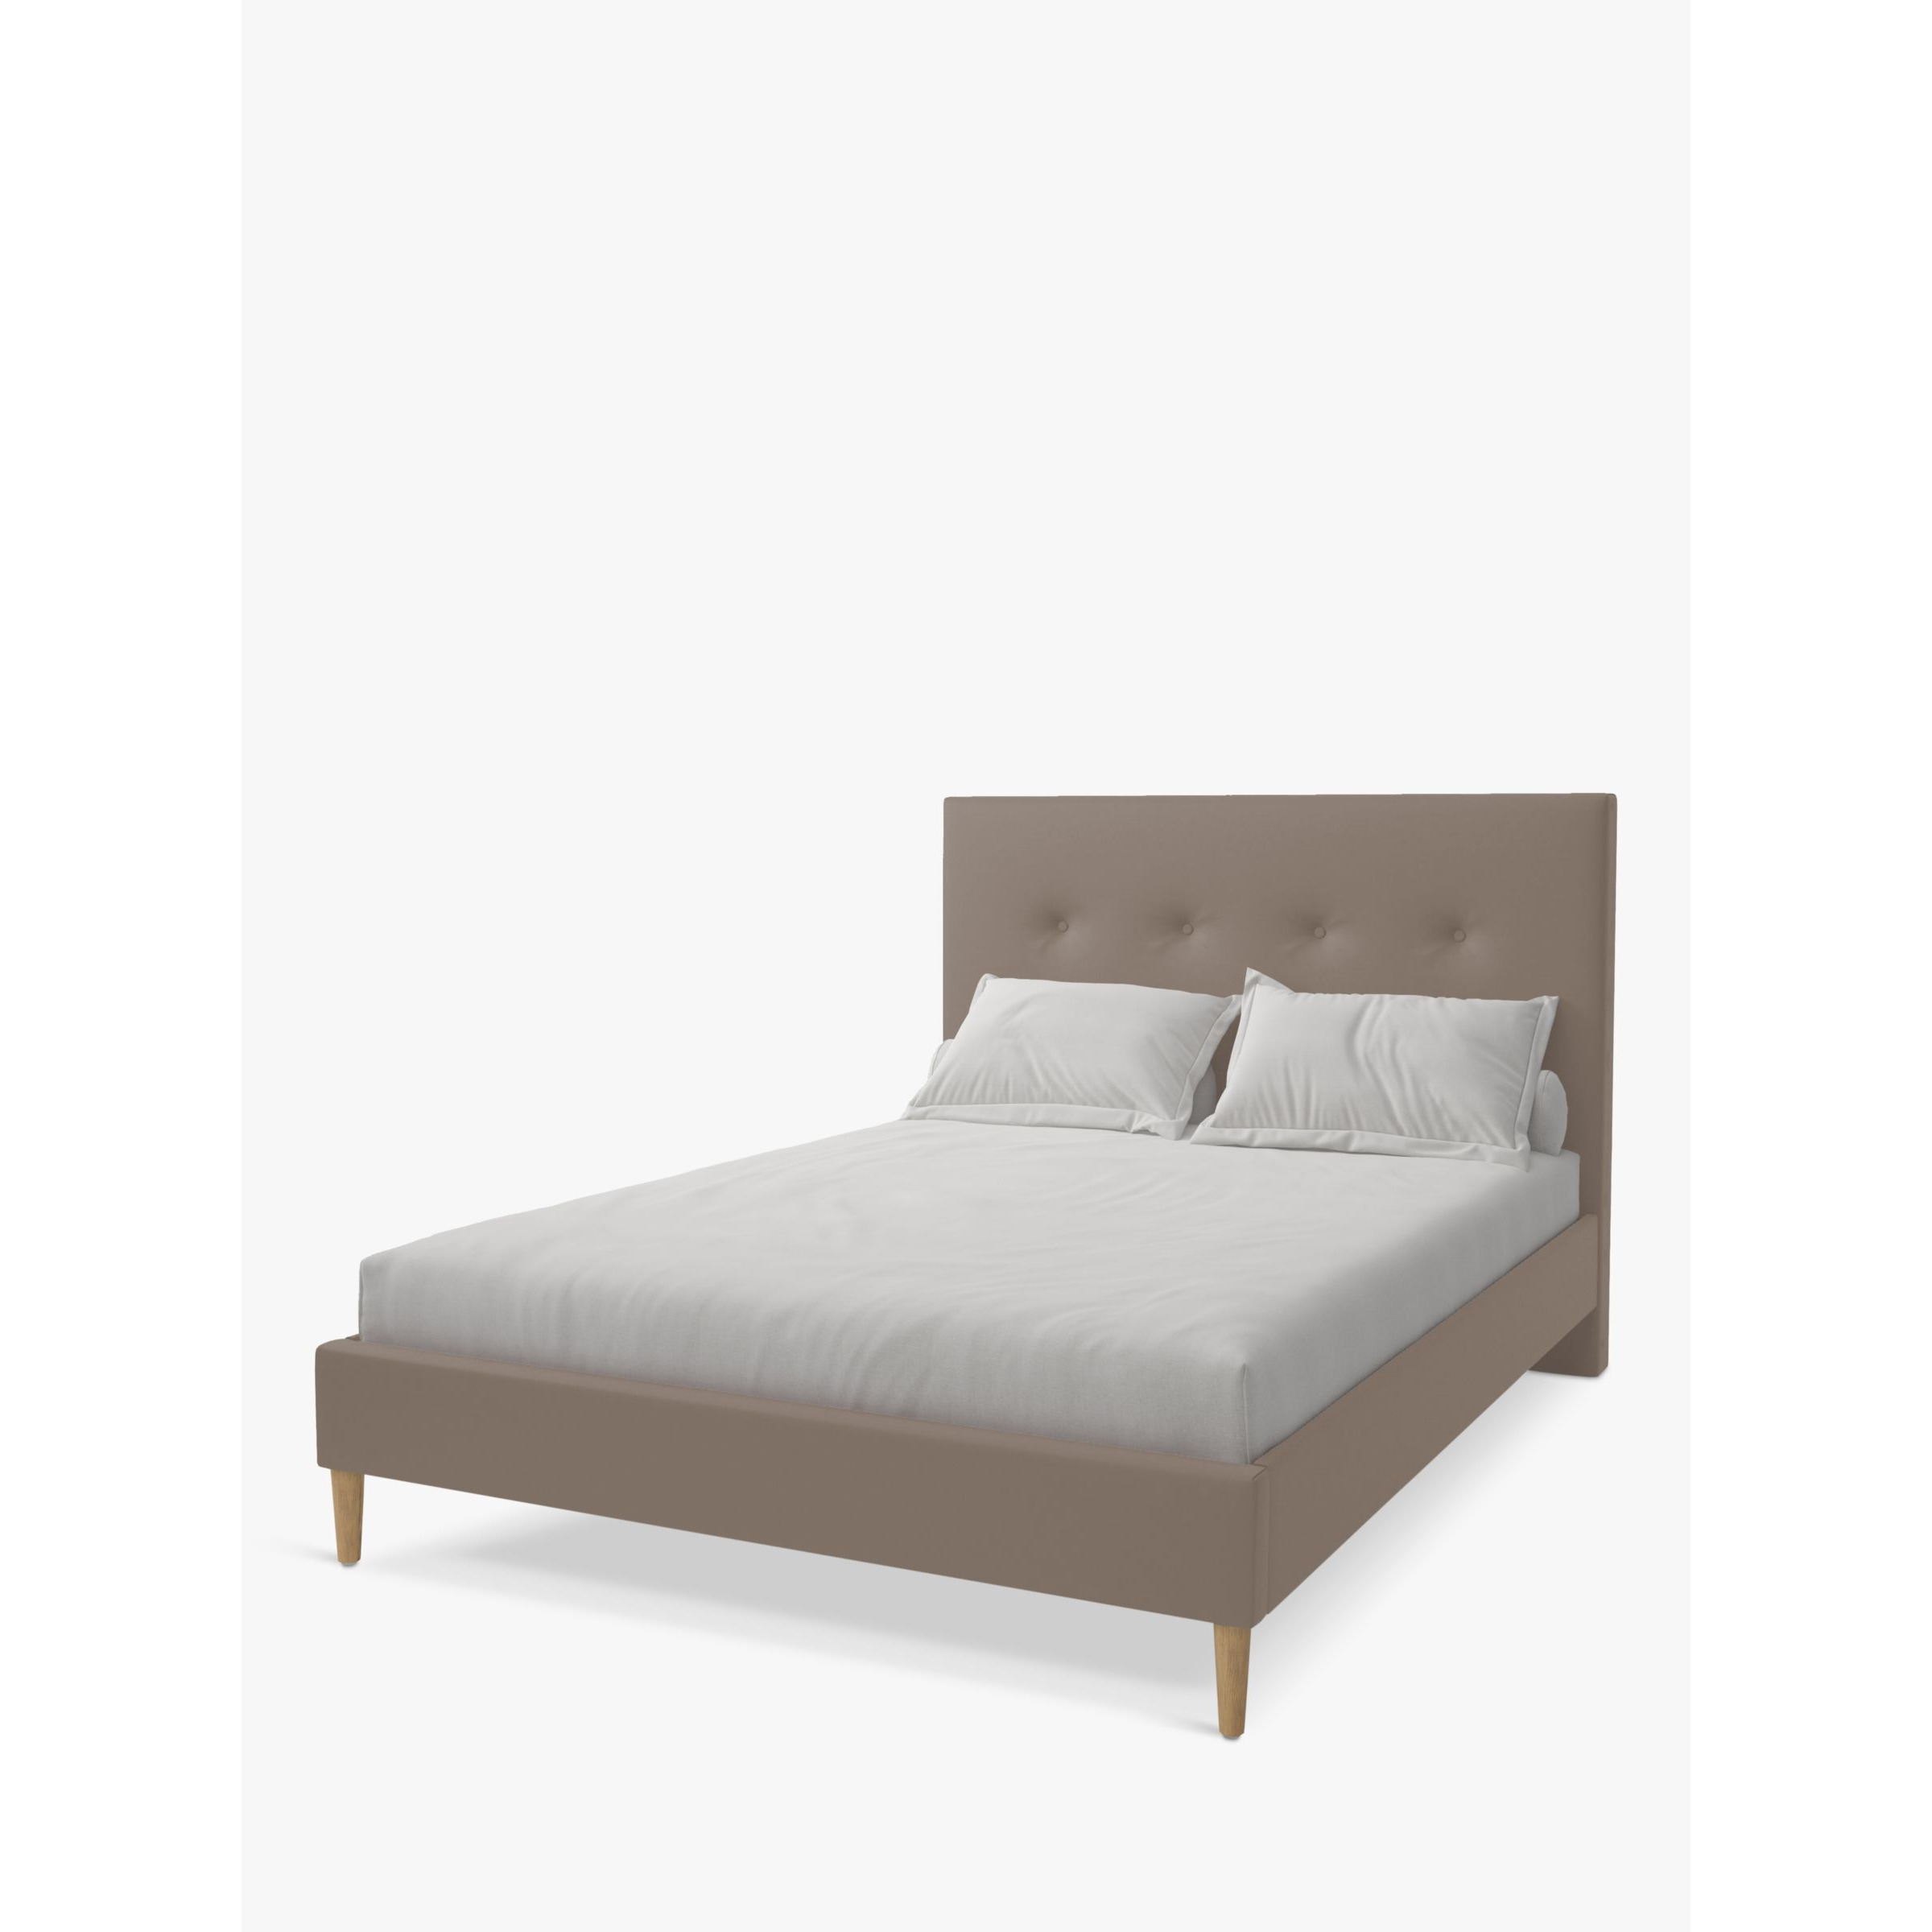 Koti Home Arun Upholstered Bed Frame, Double - image 1